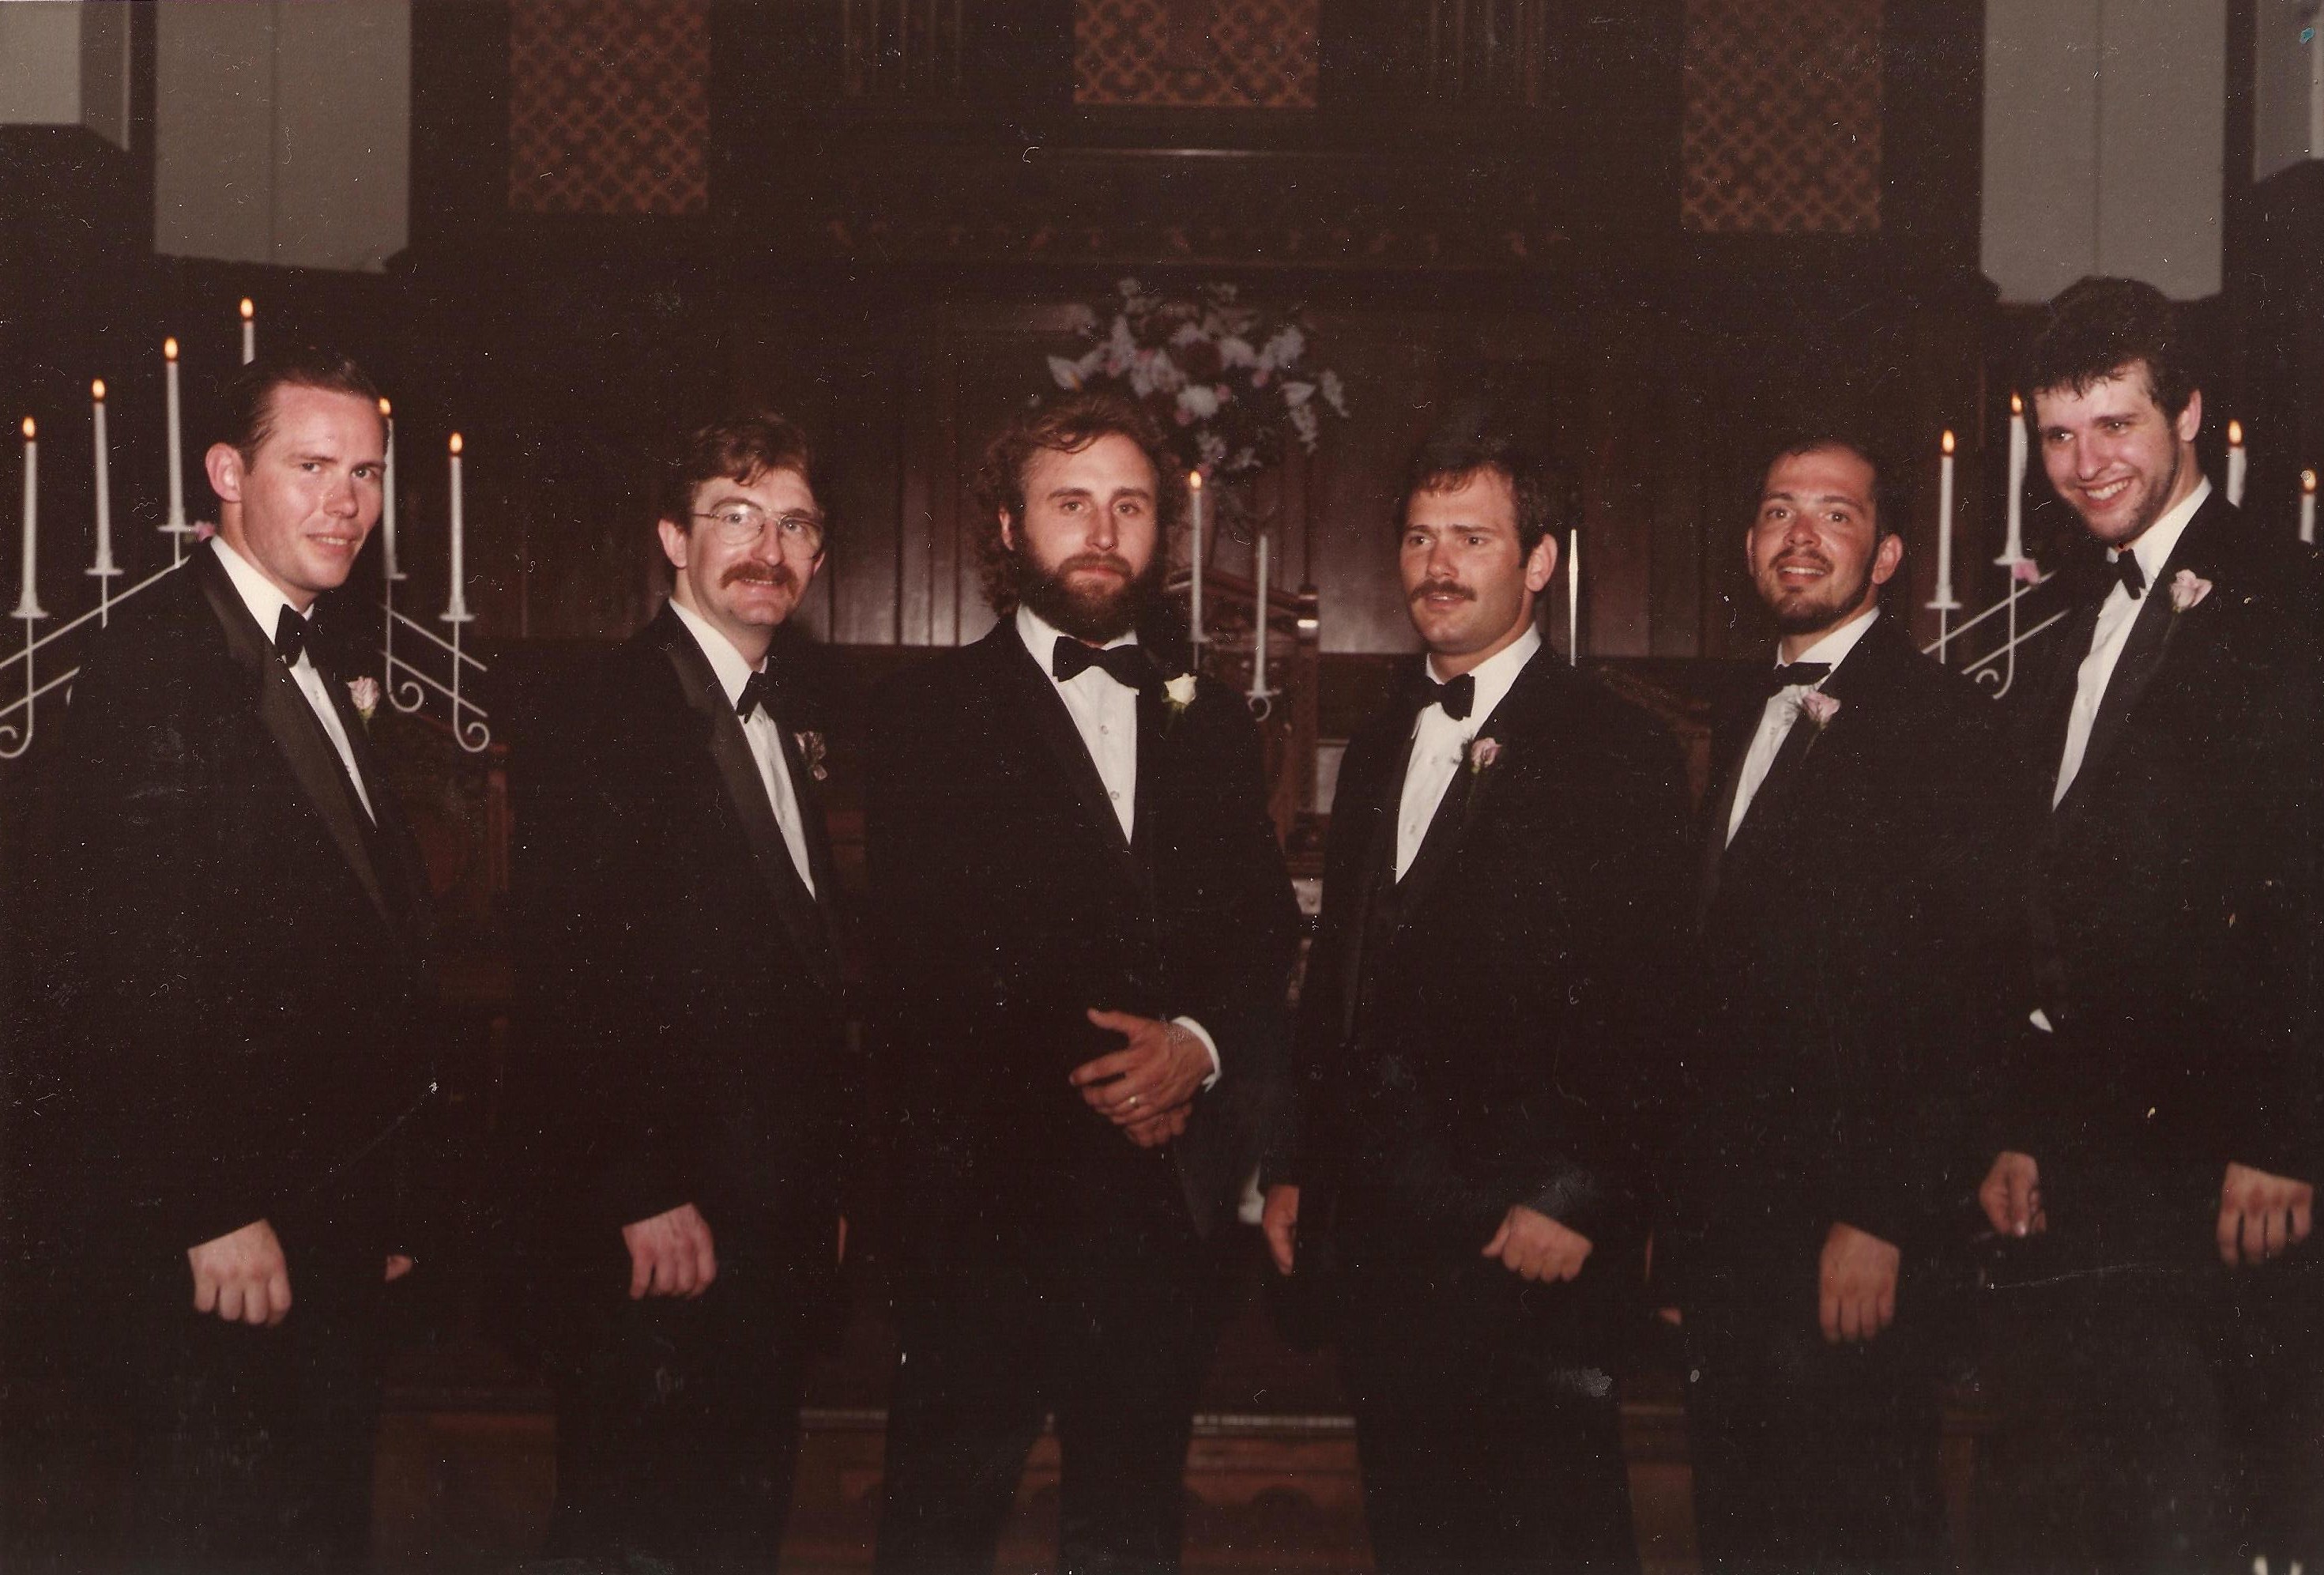 Keith Bigger, Eric Moriarty, George Schirmer, Steve Collins, Jim Lentini, and Bill Griswold